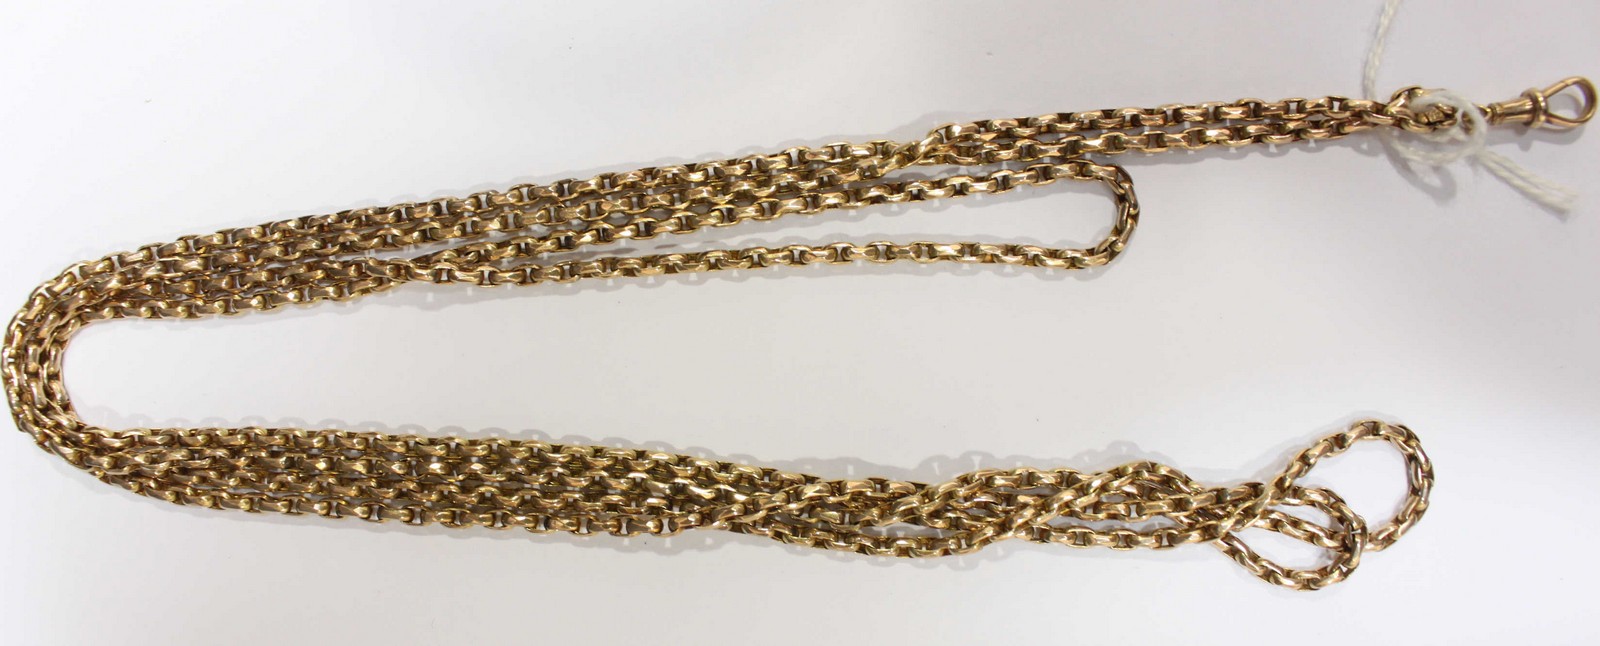 WITHDRAWN: A long 9ct gold guard or muff chain. 29.4 grams.